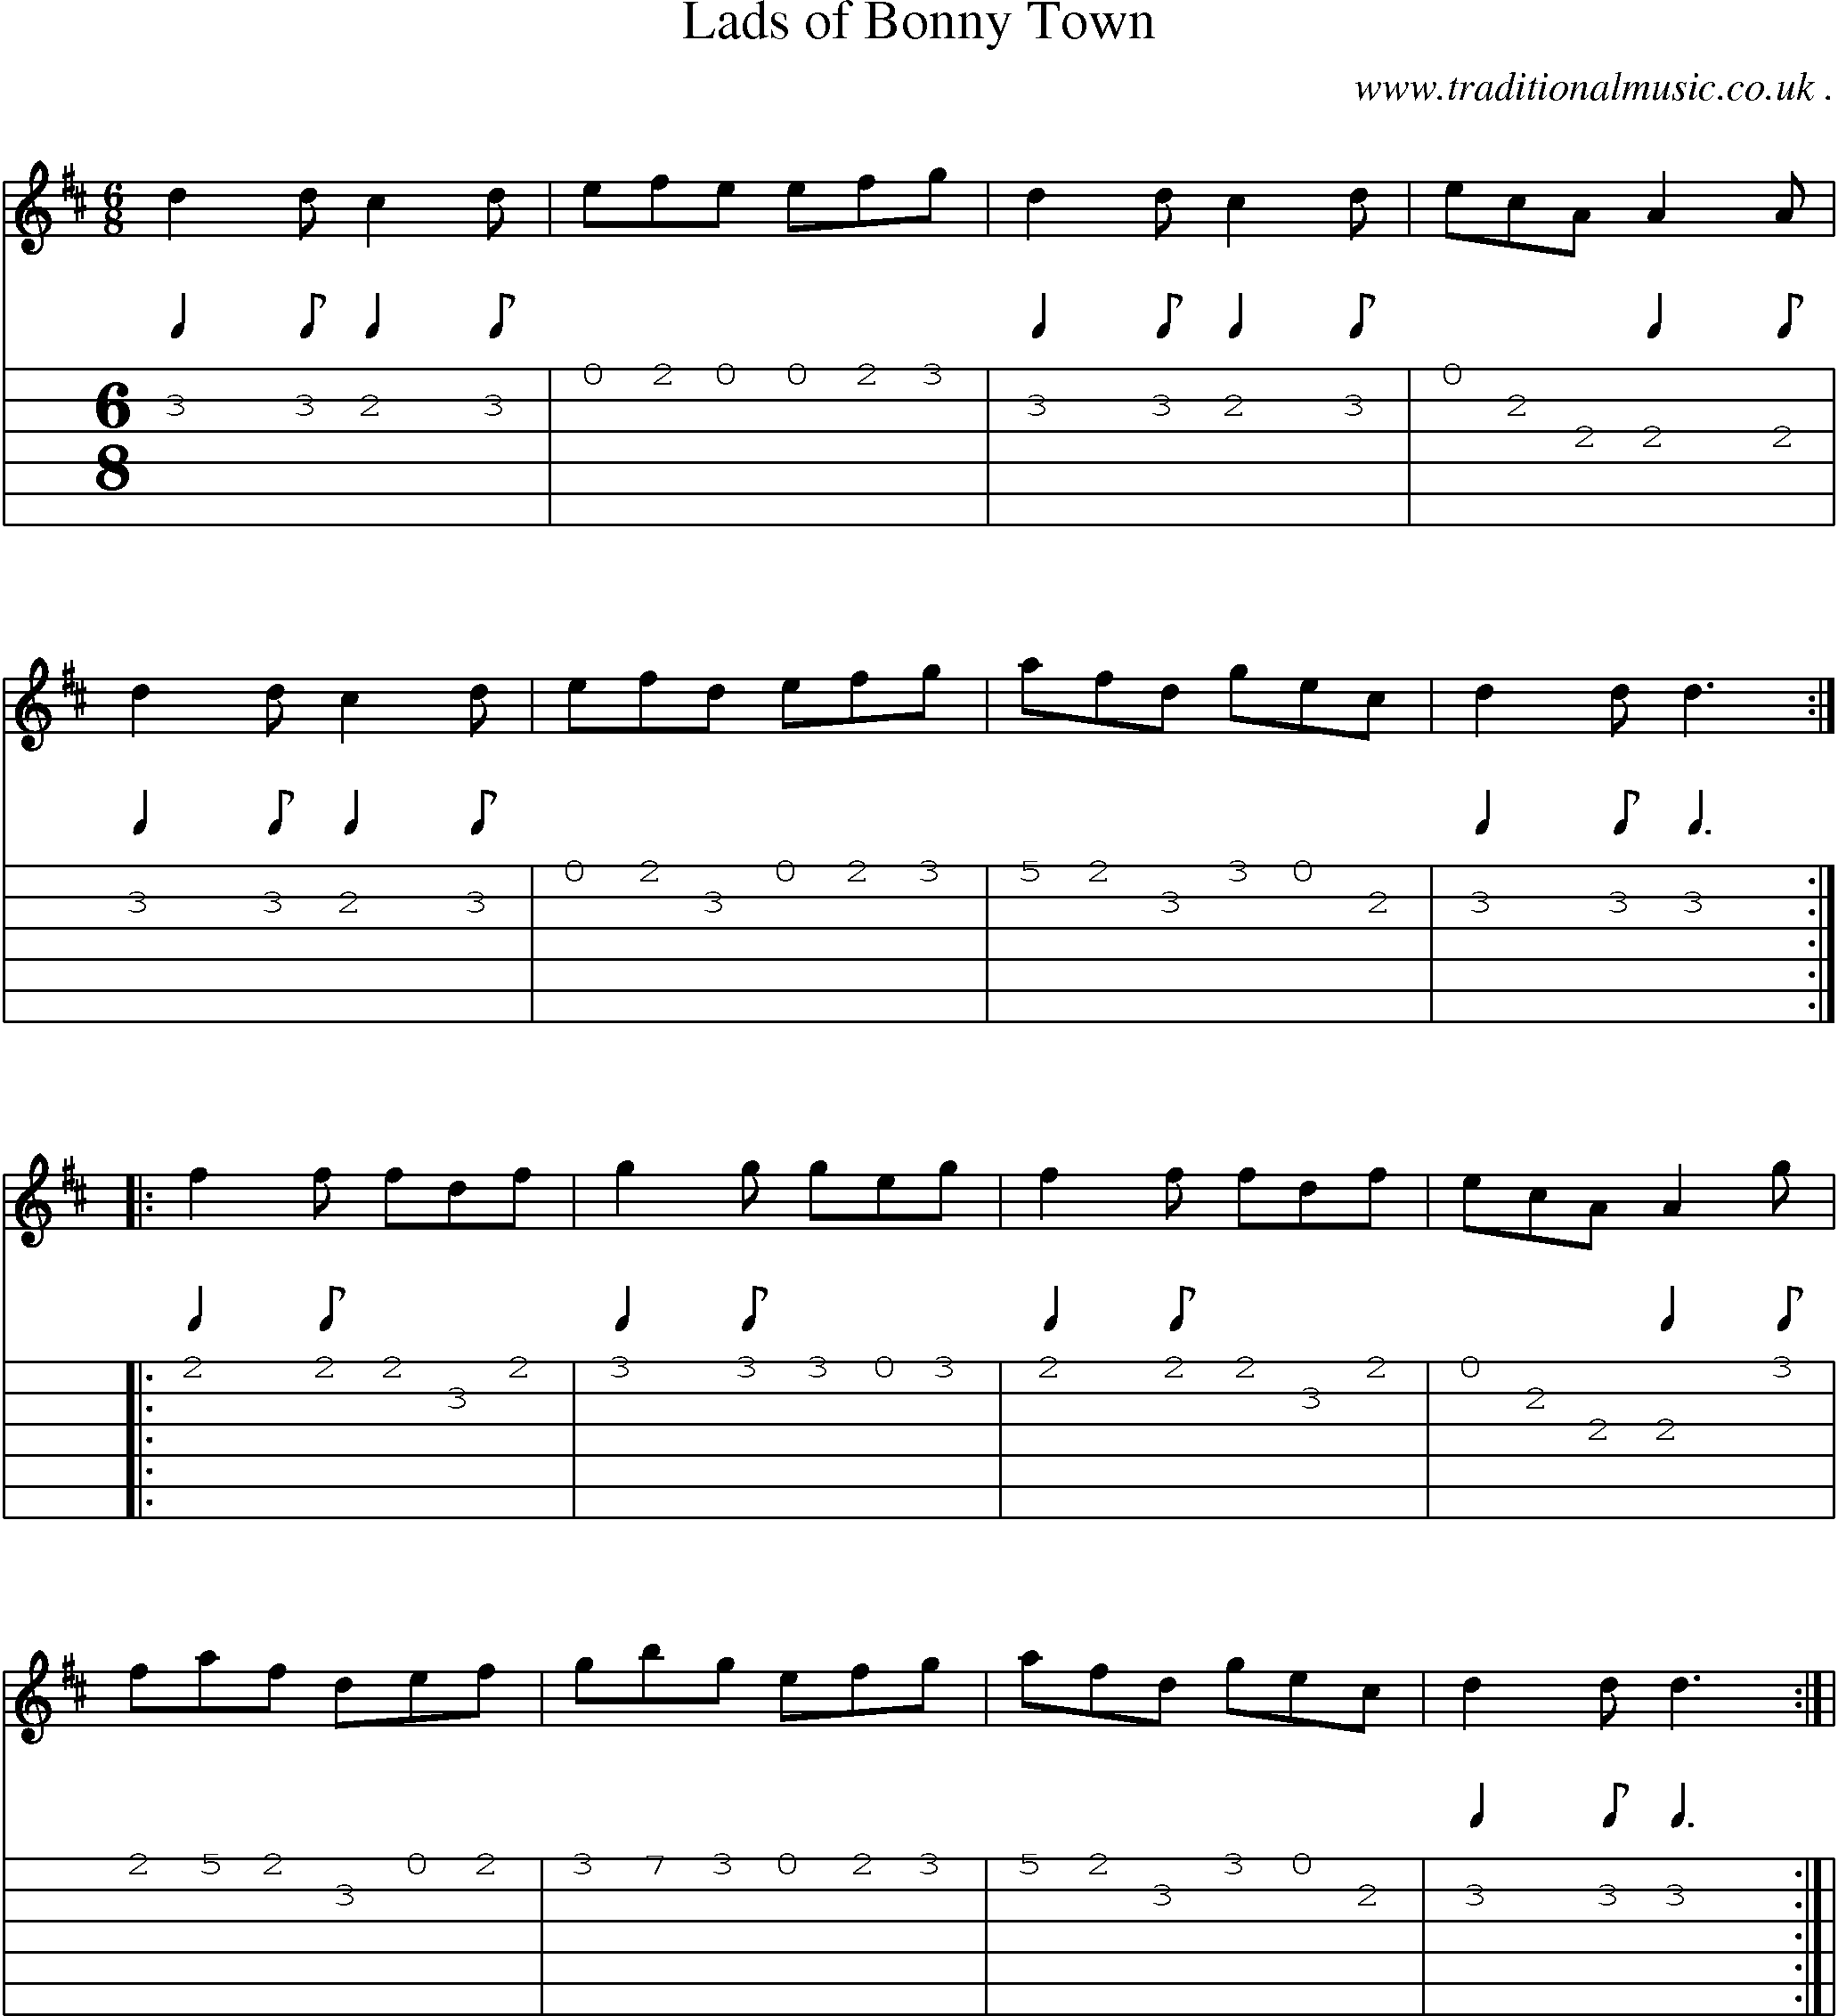 Sheet-Music and Guitar Tabs for Lads Of Bonny Town